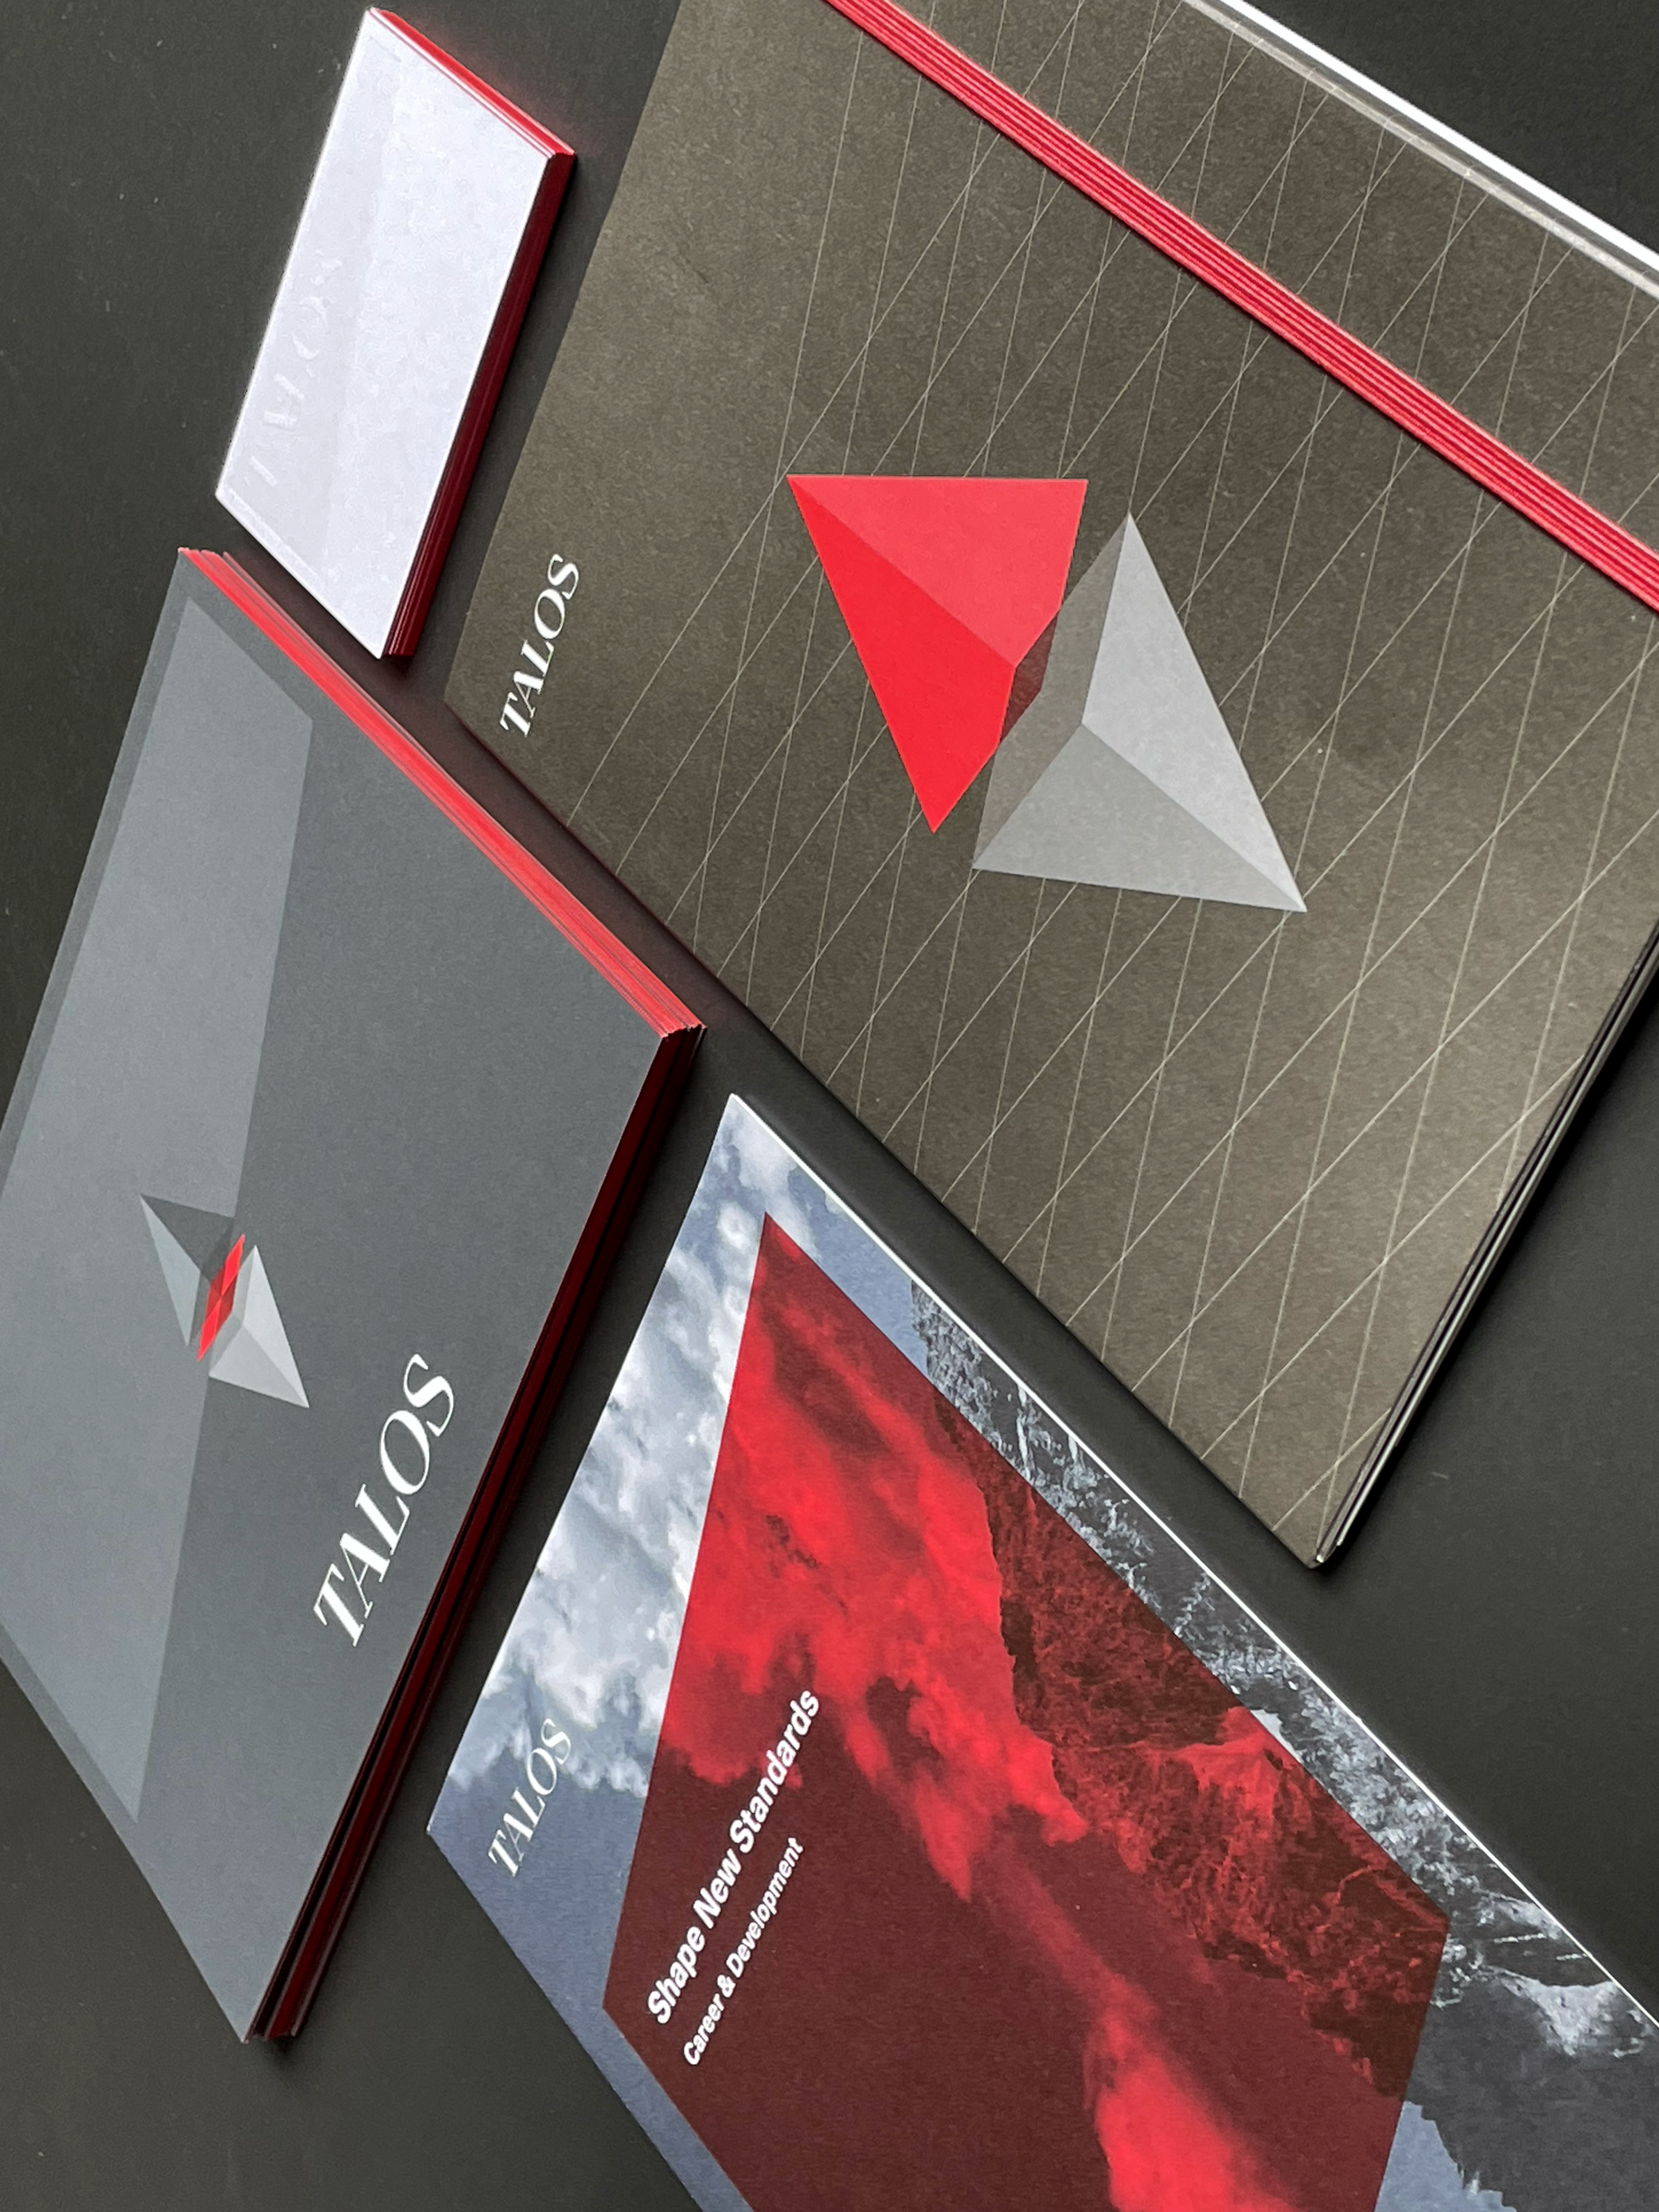 Multiple printed products created for talos.